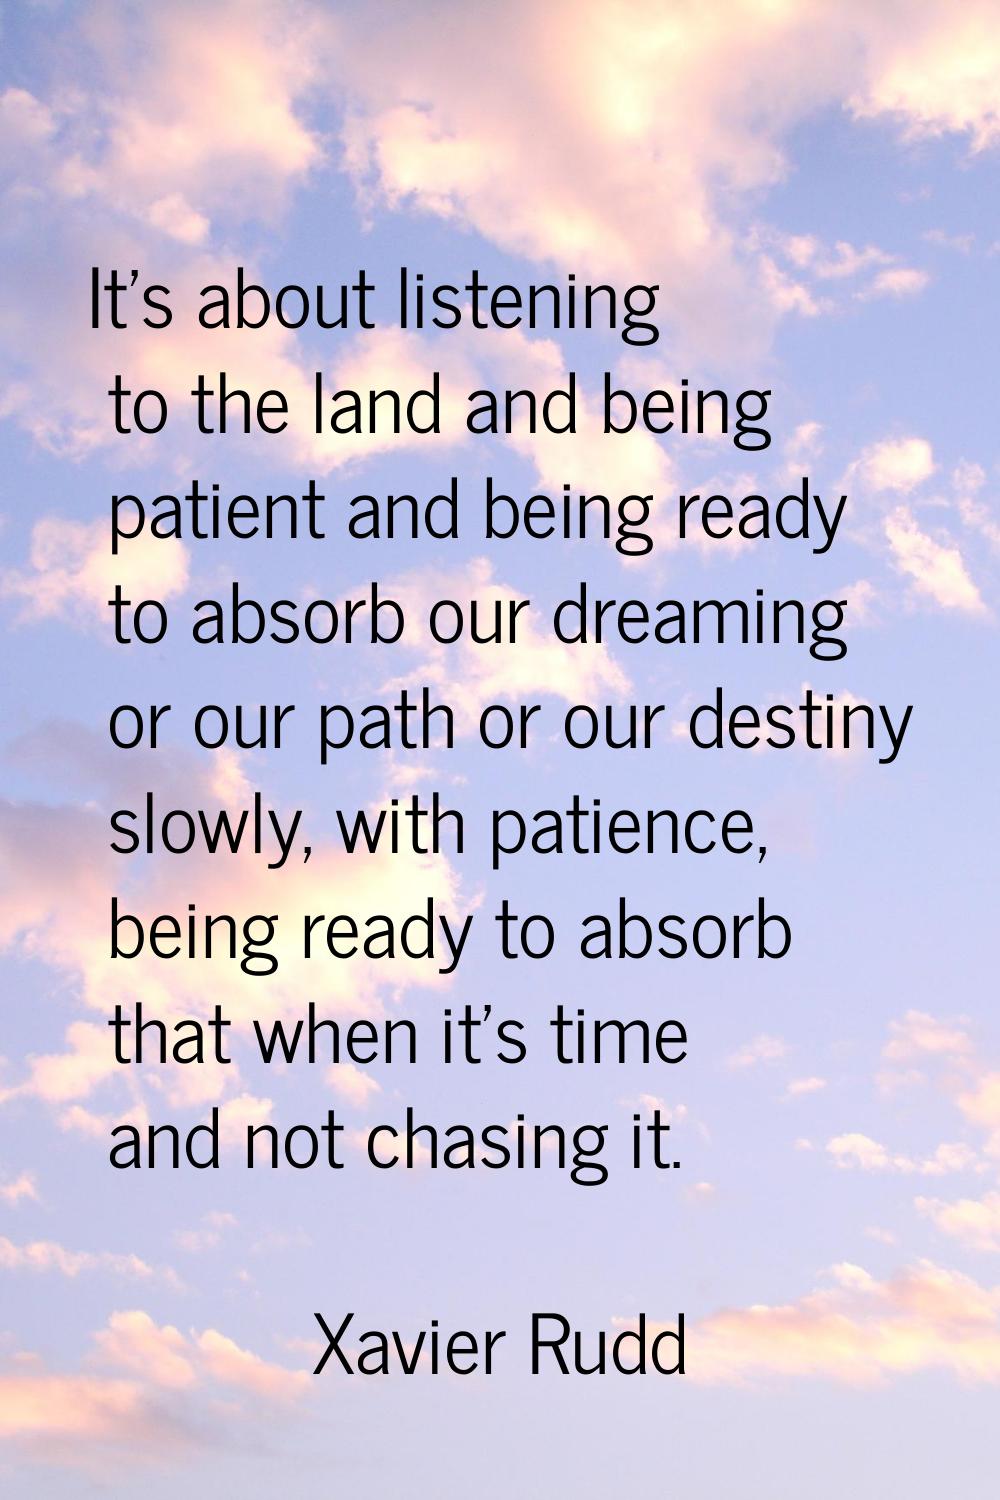 It's about listening to the land and being patient and being ready to absorb our dreaming or our pa